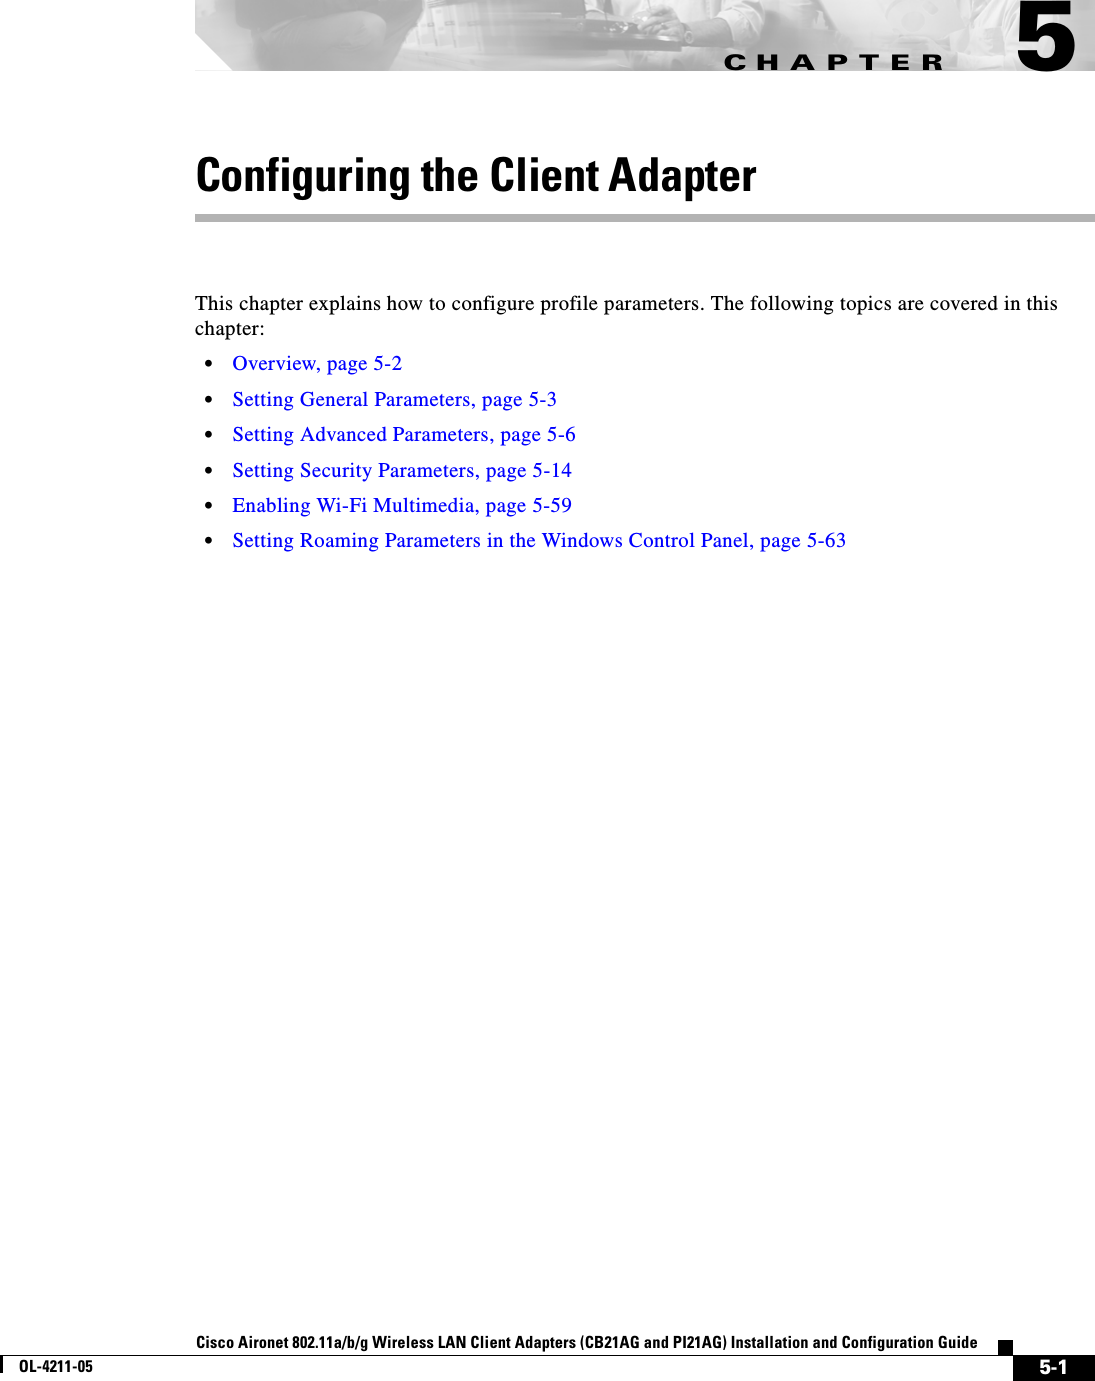 CHAPTER5-1Cisco Aironet 802.11a/b/g Wireless LAN Client Adapters (CB21AG and PI21AG) Installation and Configuration GuideOL-4211-055Configuring the Client AdapterThis chapter explains how to configure profile parameters. The following topics are covered in this chapter:•Overview, page 5-2•Setting General Parameters, page 5-3•Setting Advanced Parameters, page 5-6•Setting Security Parameters, page 5-14•Enabling Wi-Fi Multimedia, page 5-59•Setting Roaming Parameters in the Windows Control Panel, page 5-63